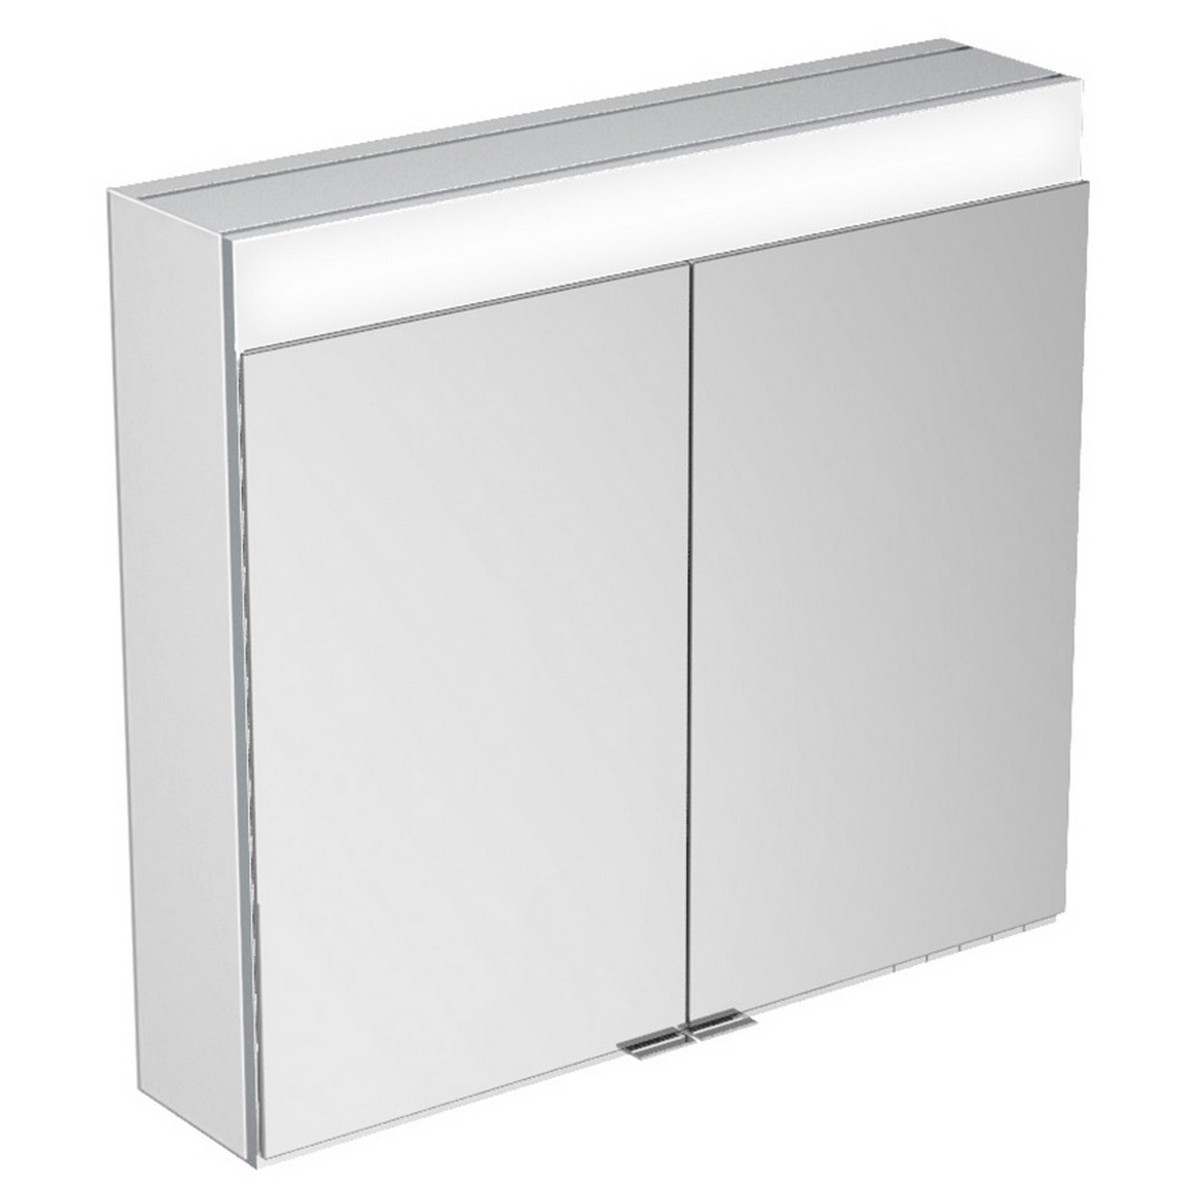 KEUCO 21521171351 EDITION 400 28 W X 6 1/2 D X 25 5/8 H INCH 2-DOOR 2700-6500K LED WALL MOUNTED MIRROR MEDICINE CABINET IN ALUMINUM